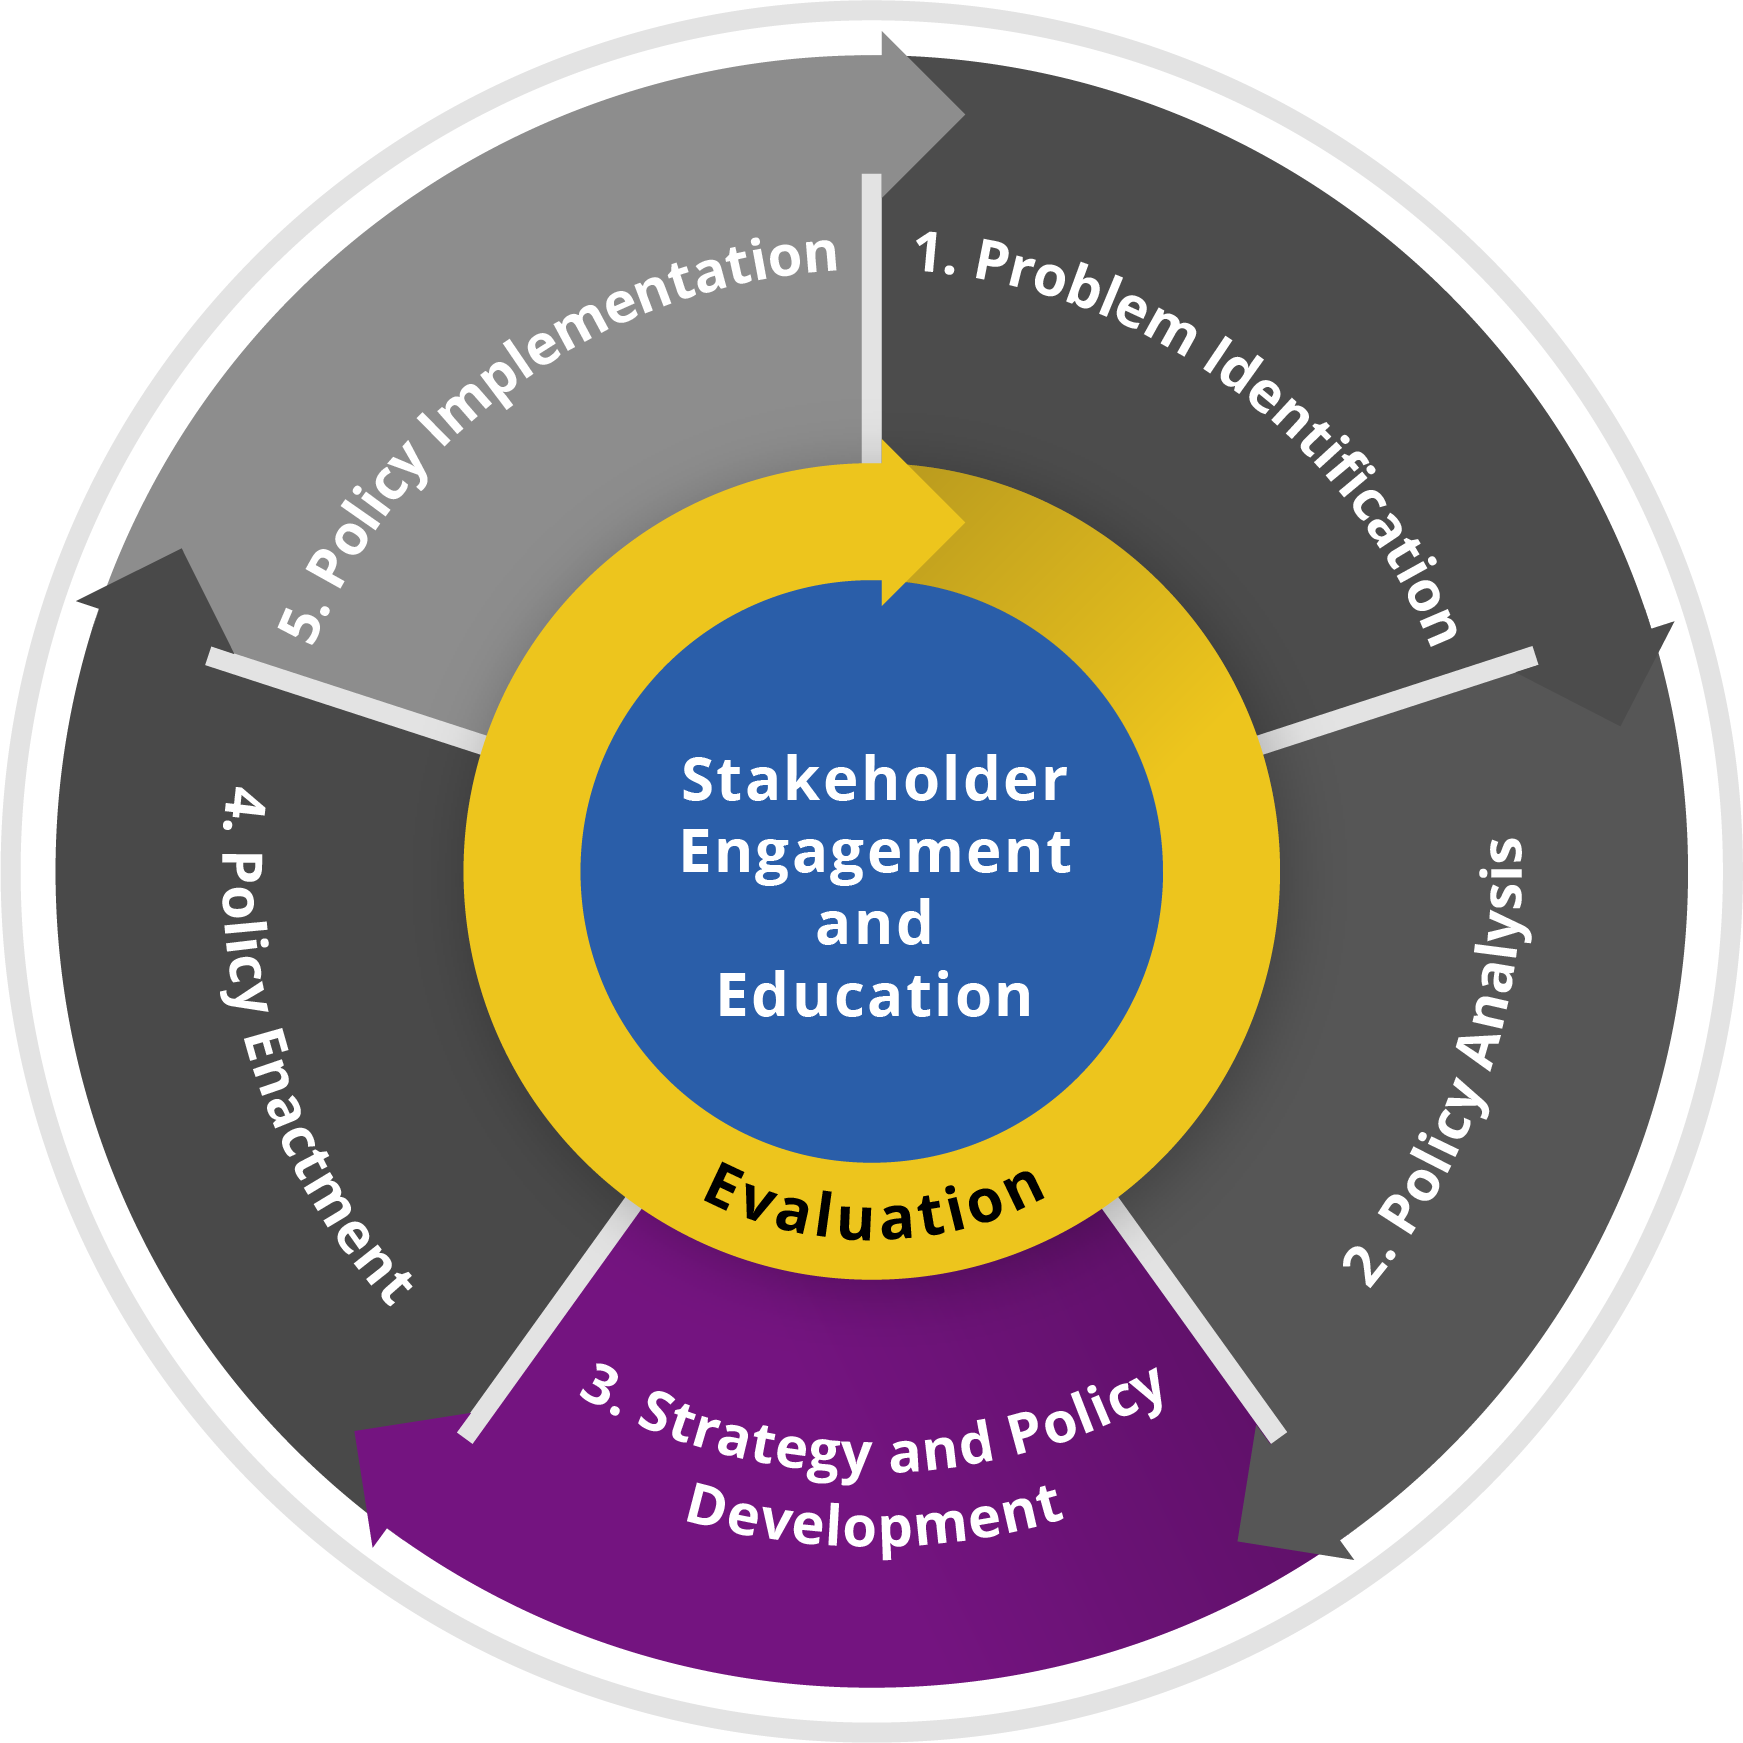 Stakeholder engagement and education wheel, strategy and problem identification highlighted